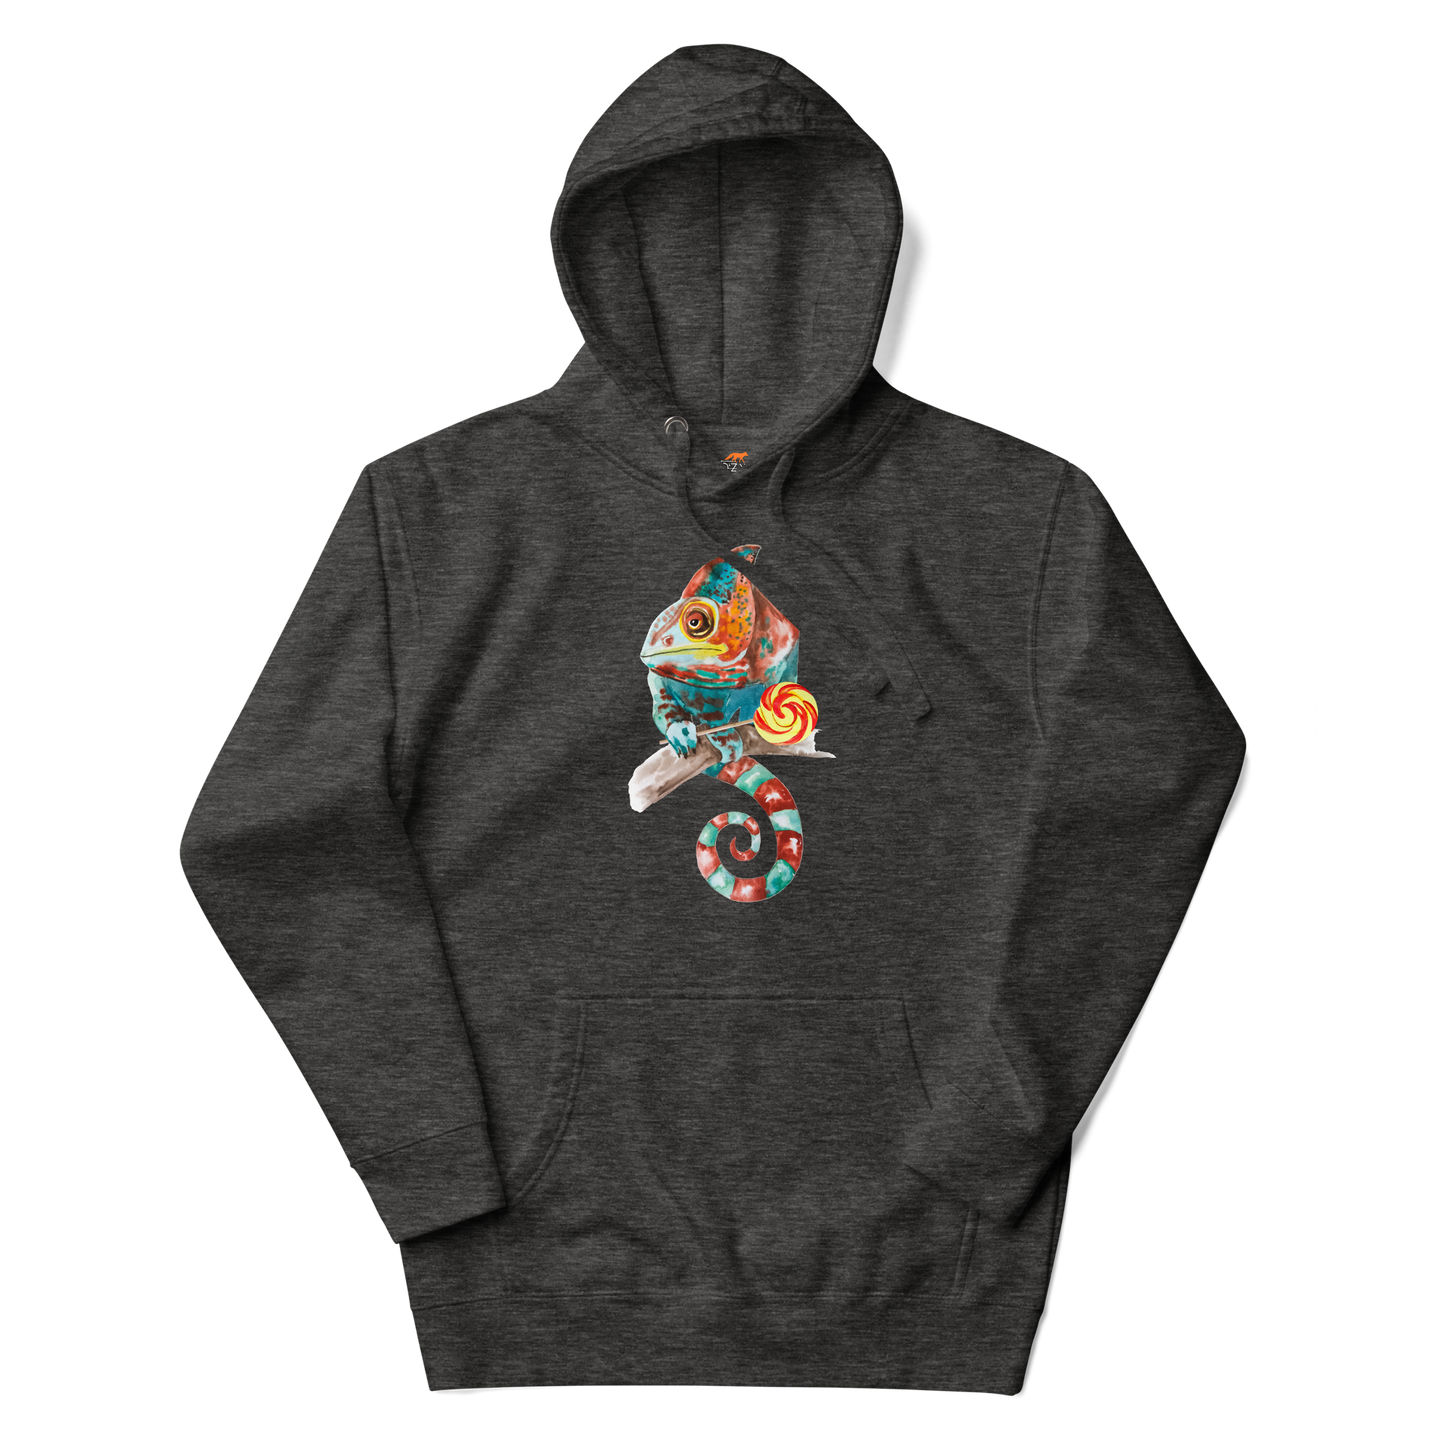 Charcoal Heather Premium Chameleon Hoodie featuring a vibrant Chameleon With A Lollipop graphic on the chest - Cool Graphic Chameleon Hoodies - Boozy Fox